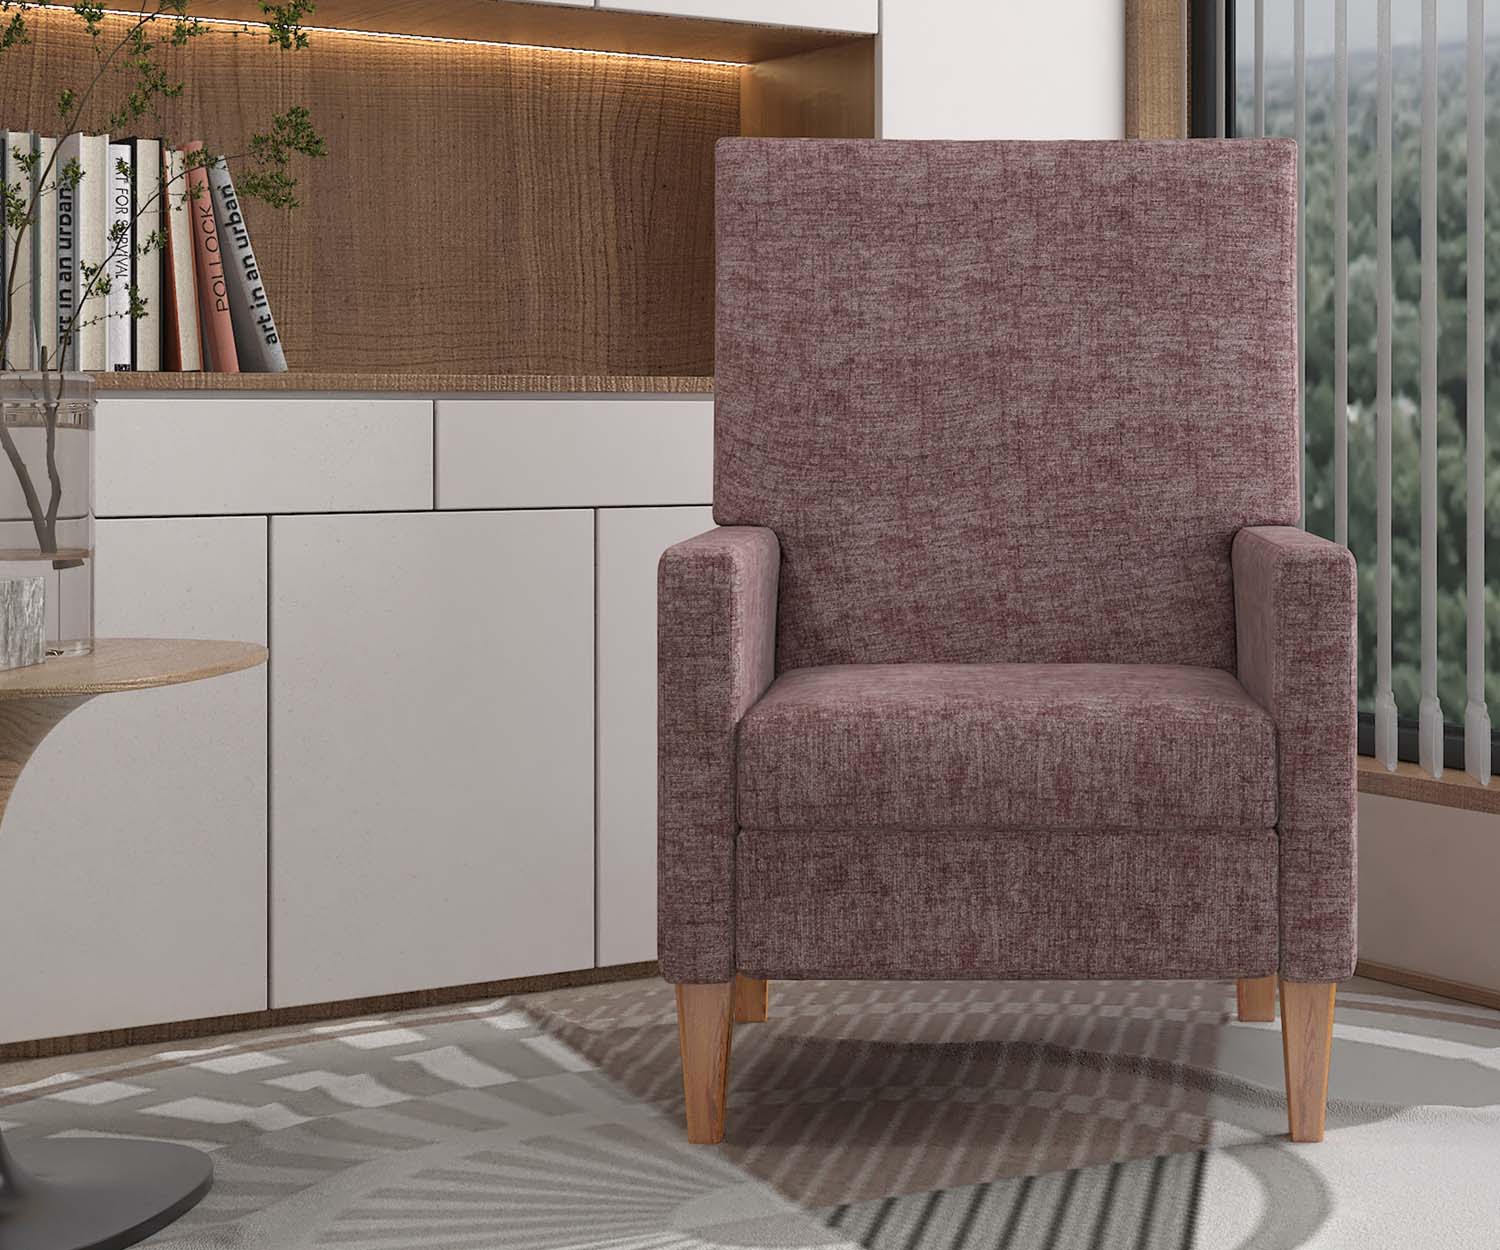 Elet High Wide Back Armchair